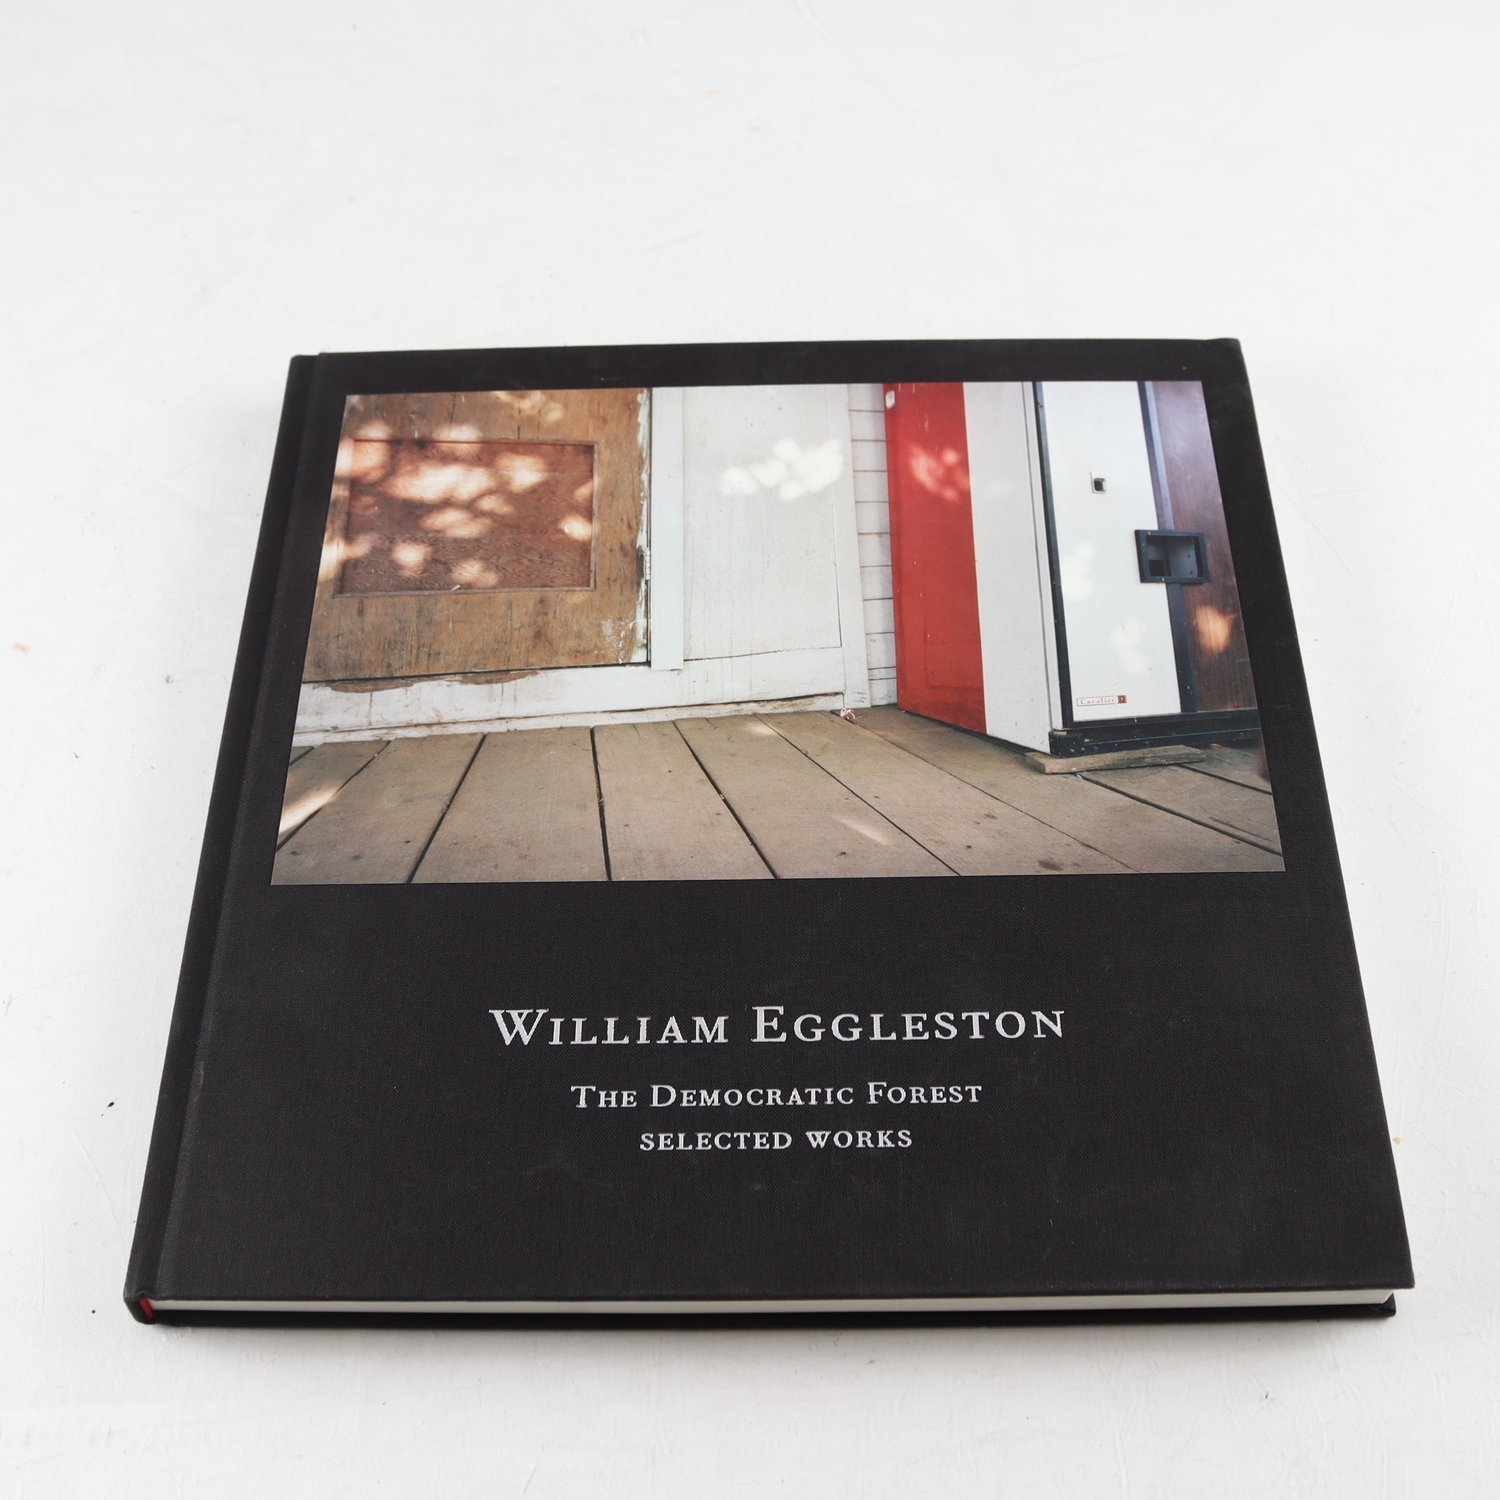 William Eggleston, The Democratic Forest: Selected Works